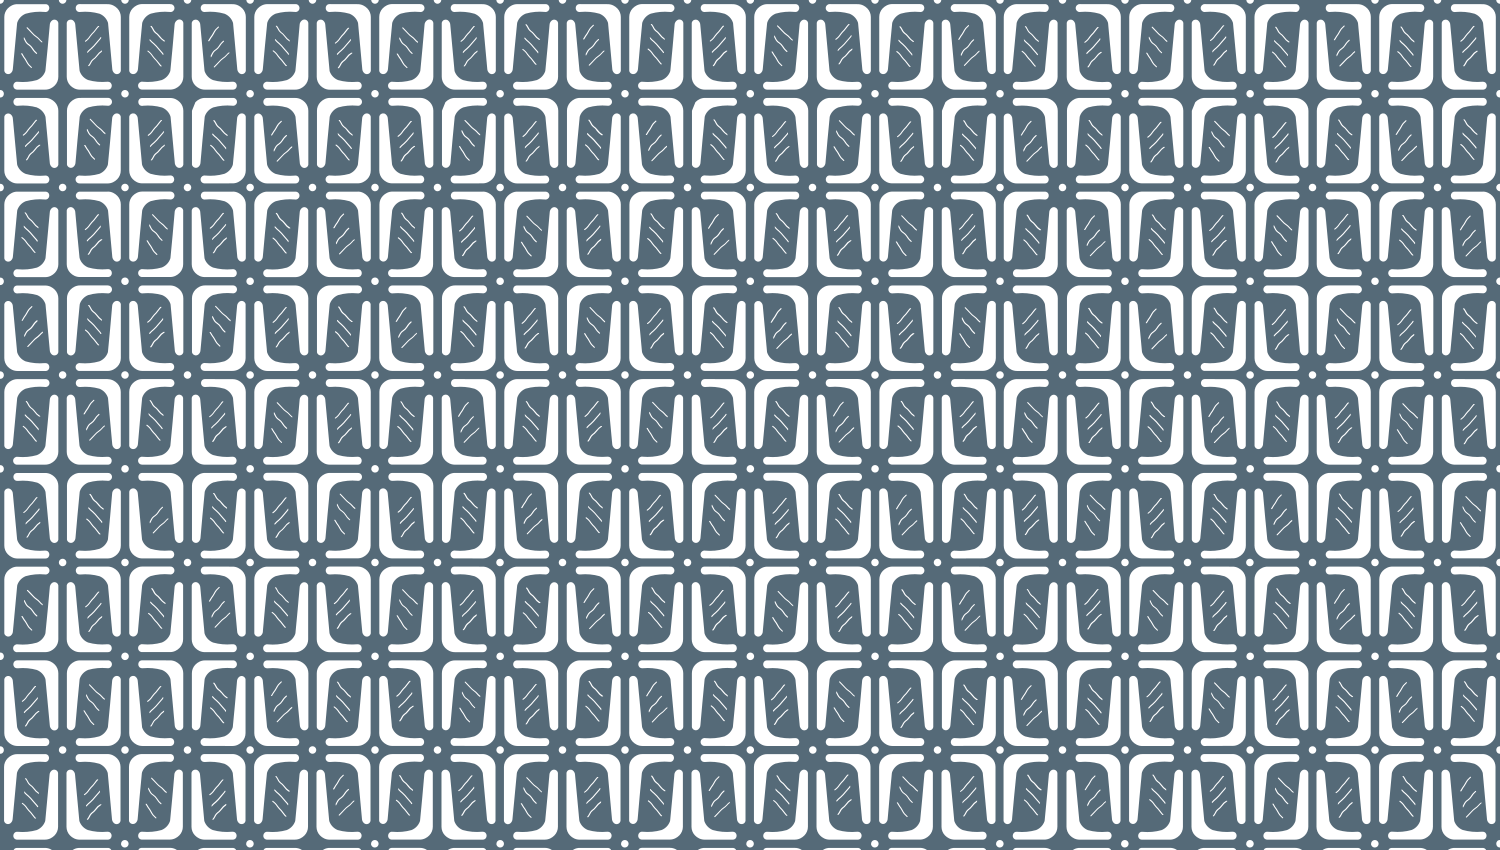 Parasoleil™ Kenyan© pattern displayed with a blue color overlay